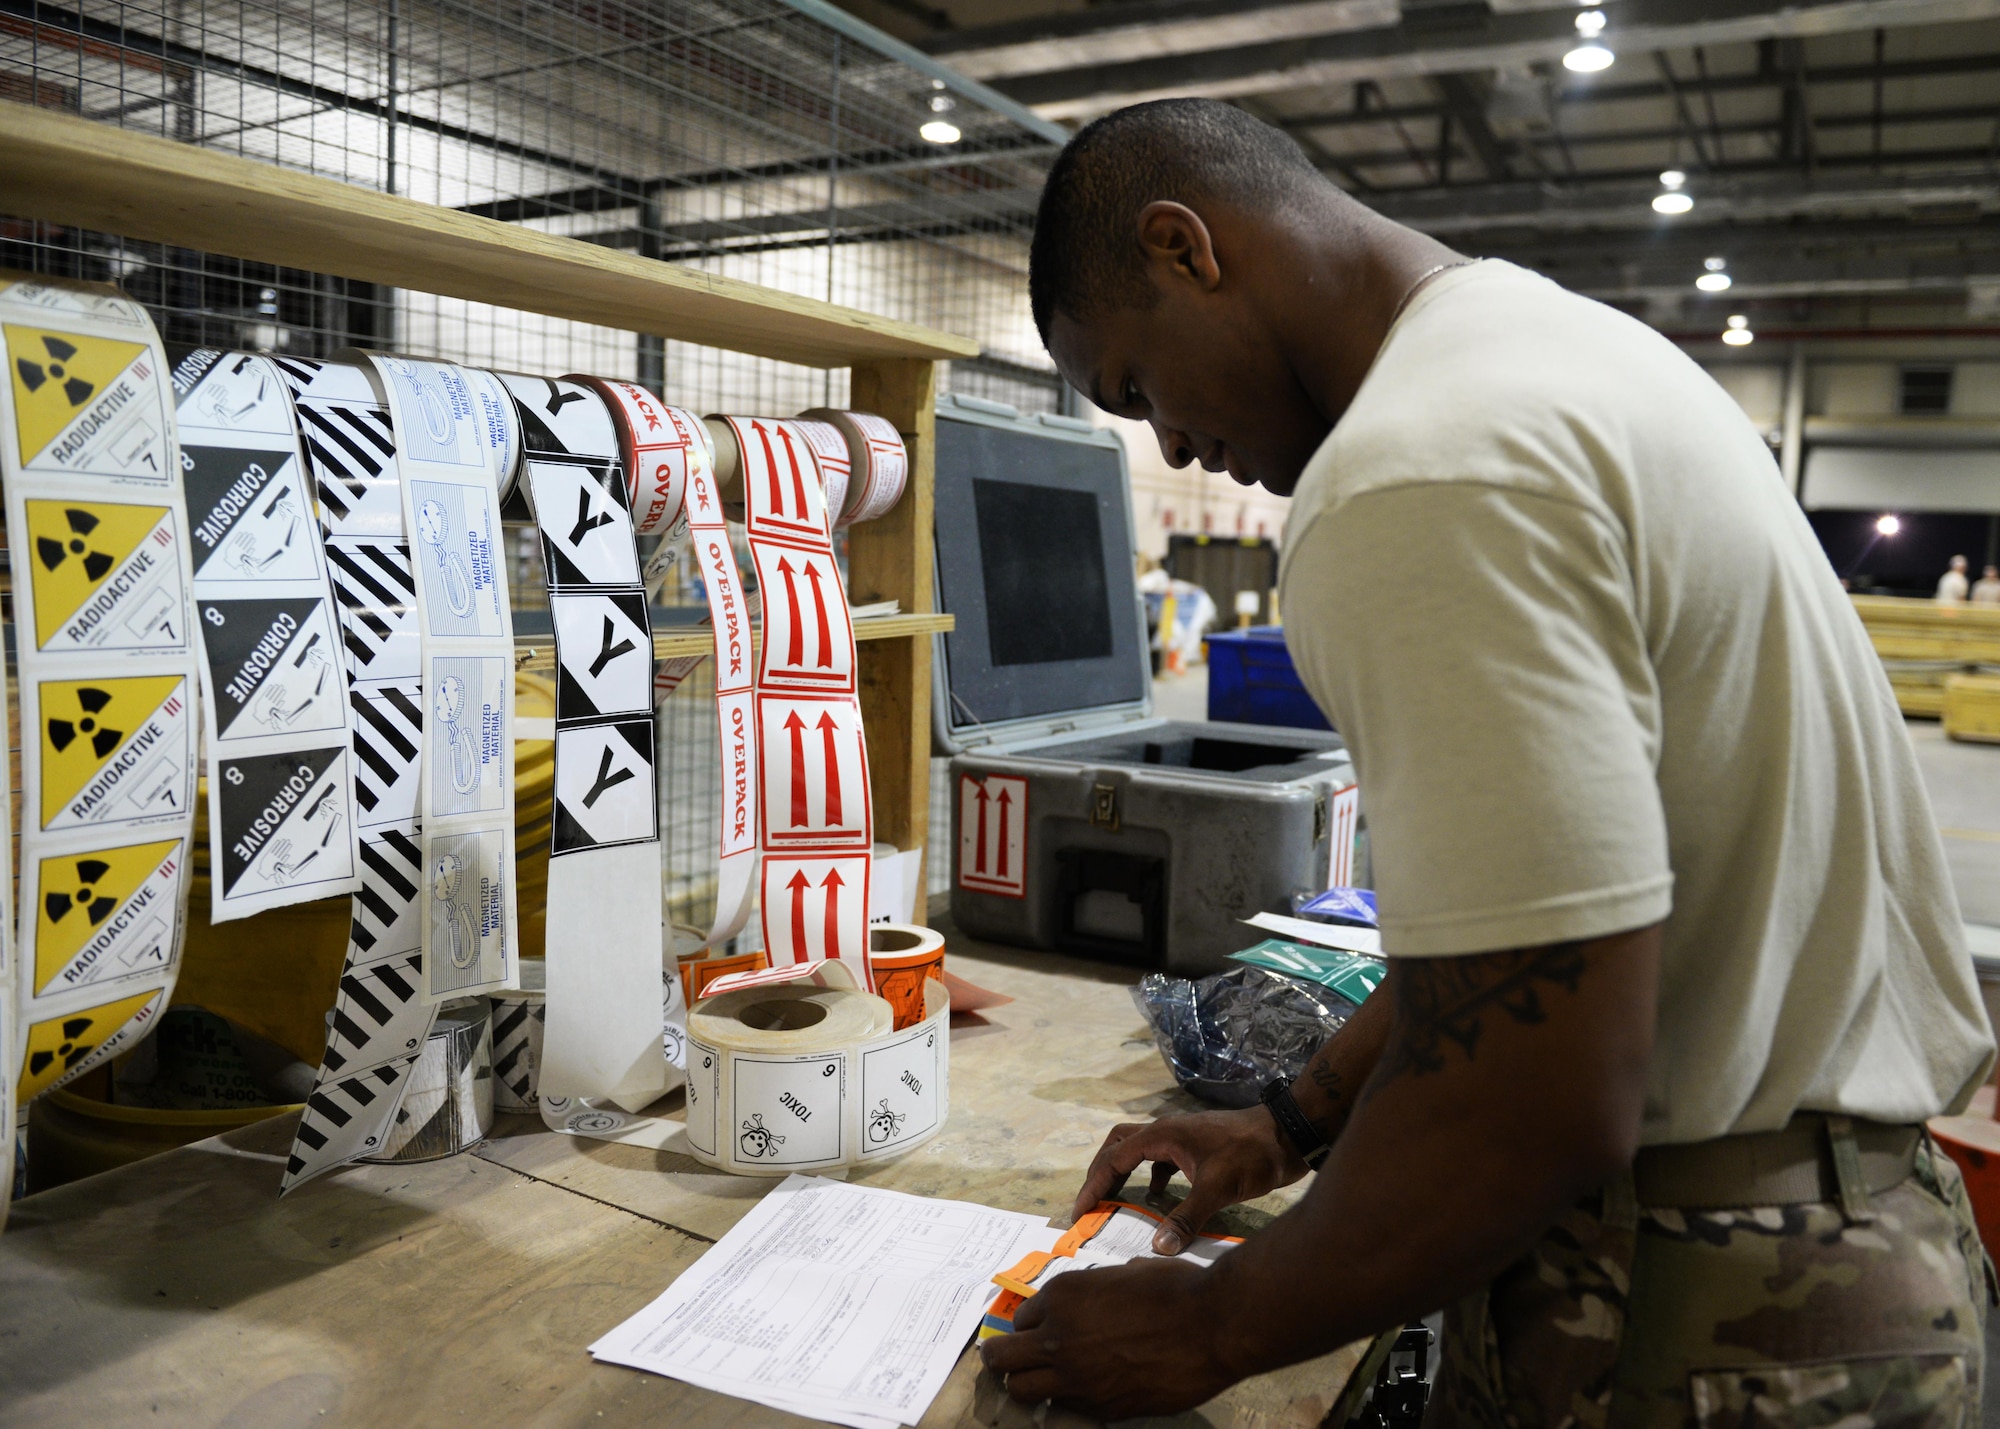 U.S. Air Force Senior Airman Kionne Lewis, 455th Expeditionary Logistics Readiness Squadron’s Traffic Management Office cargo movement specialist, prepares to label material to be shipped out to Al Udied, Air Base, Qatar, July 21, 2015, at Bagram Airfield, Afghanistan. Lewis and his team are responsible for ensuring all shipments from the AOR, to include hazardous and classified materials as well as aircraft parts, are ready for transport. (U.S. Air Force photo by Senior Airman Cierra Presentado/Released)